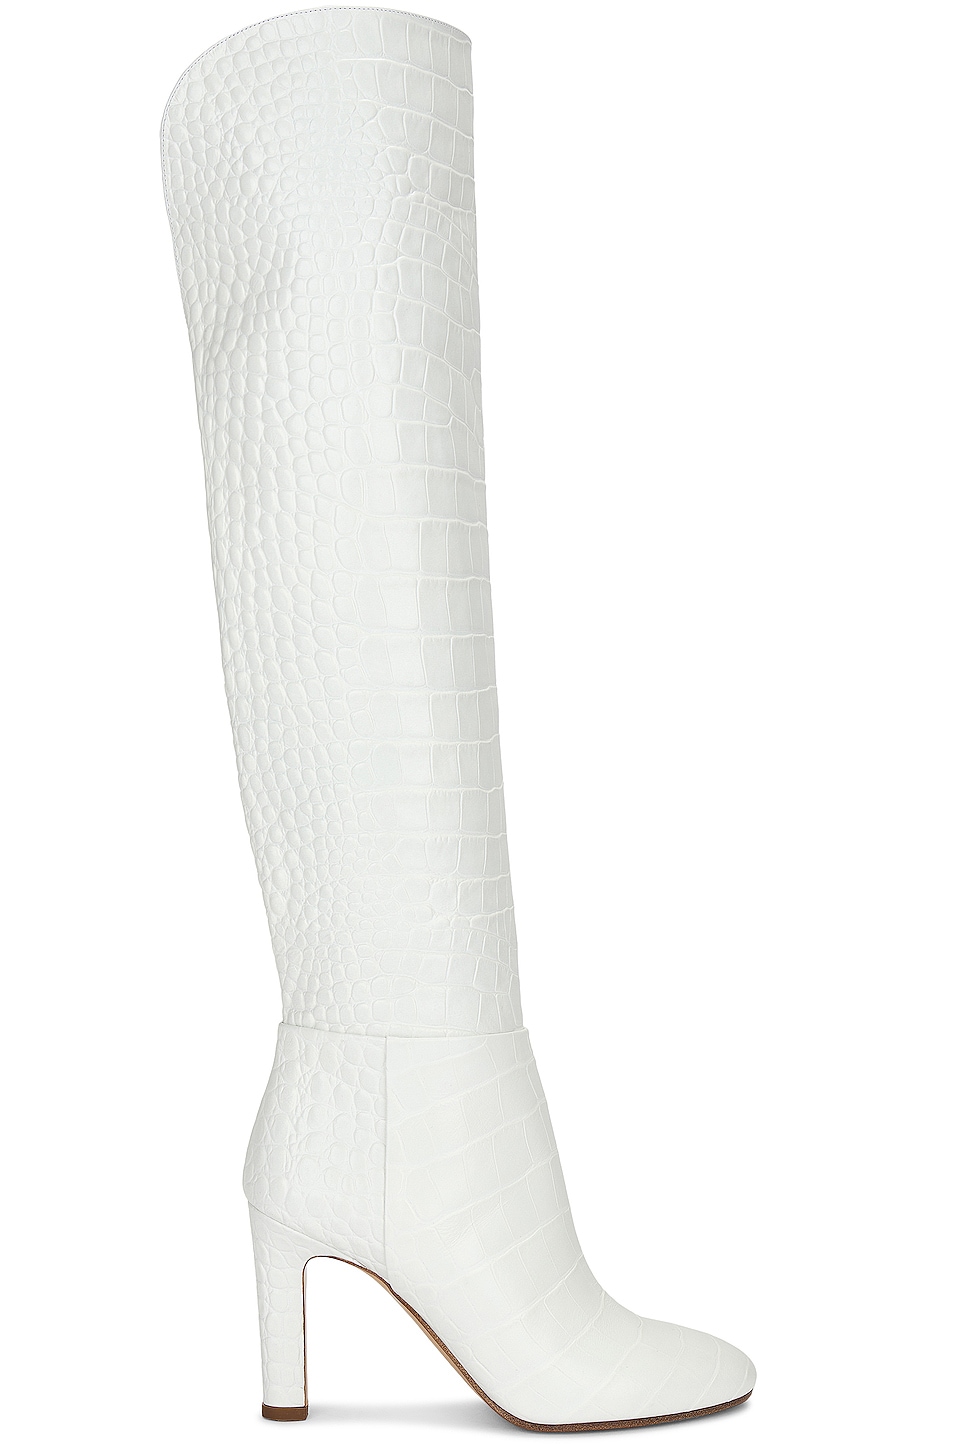 Image 1 of Gabriela Hearst Linda Over The Knee Boot in White